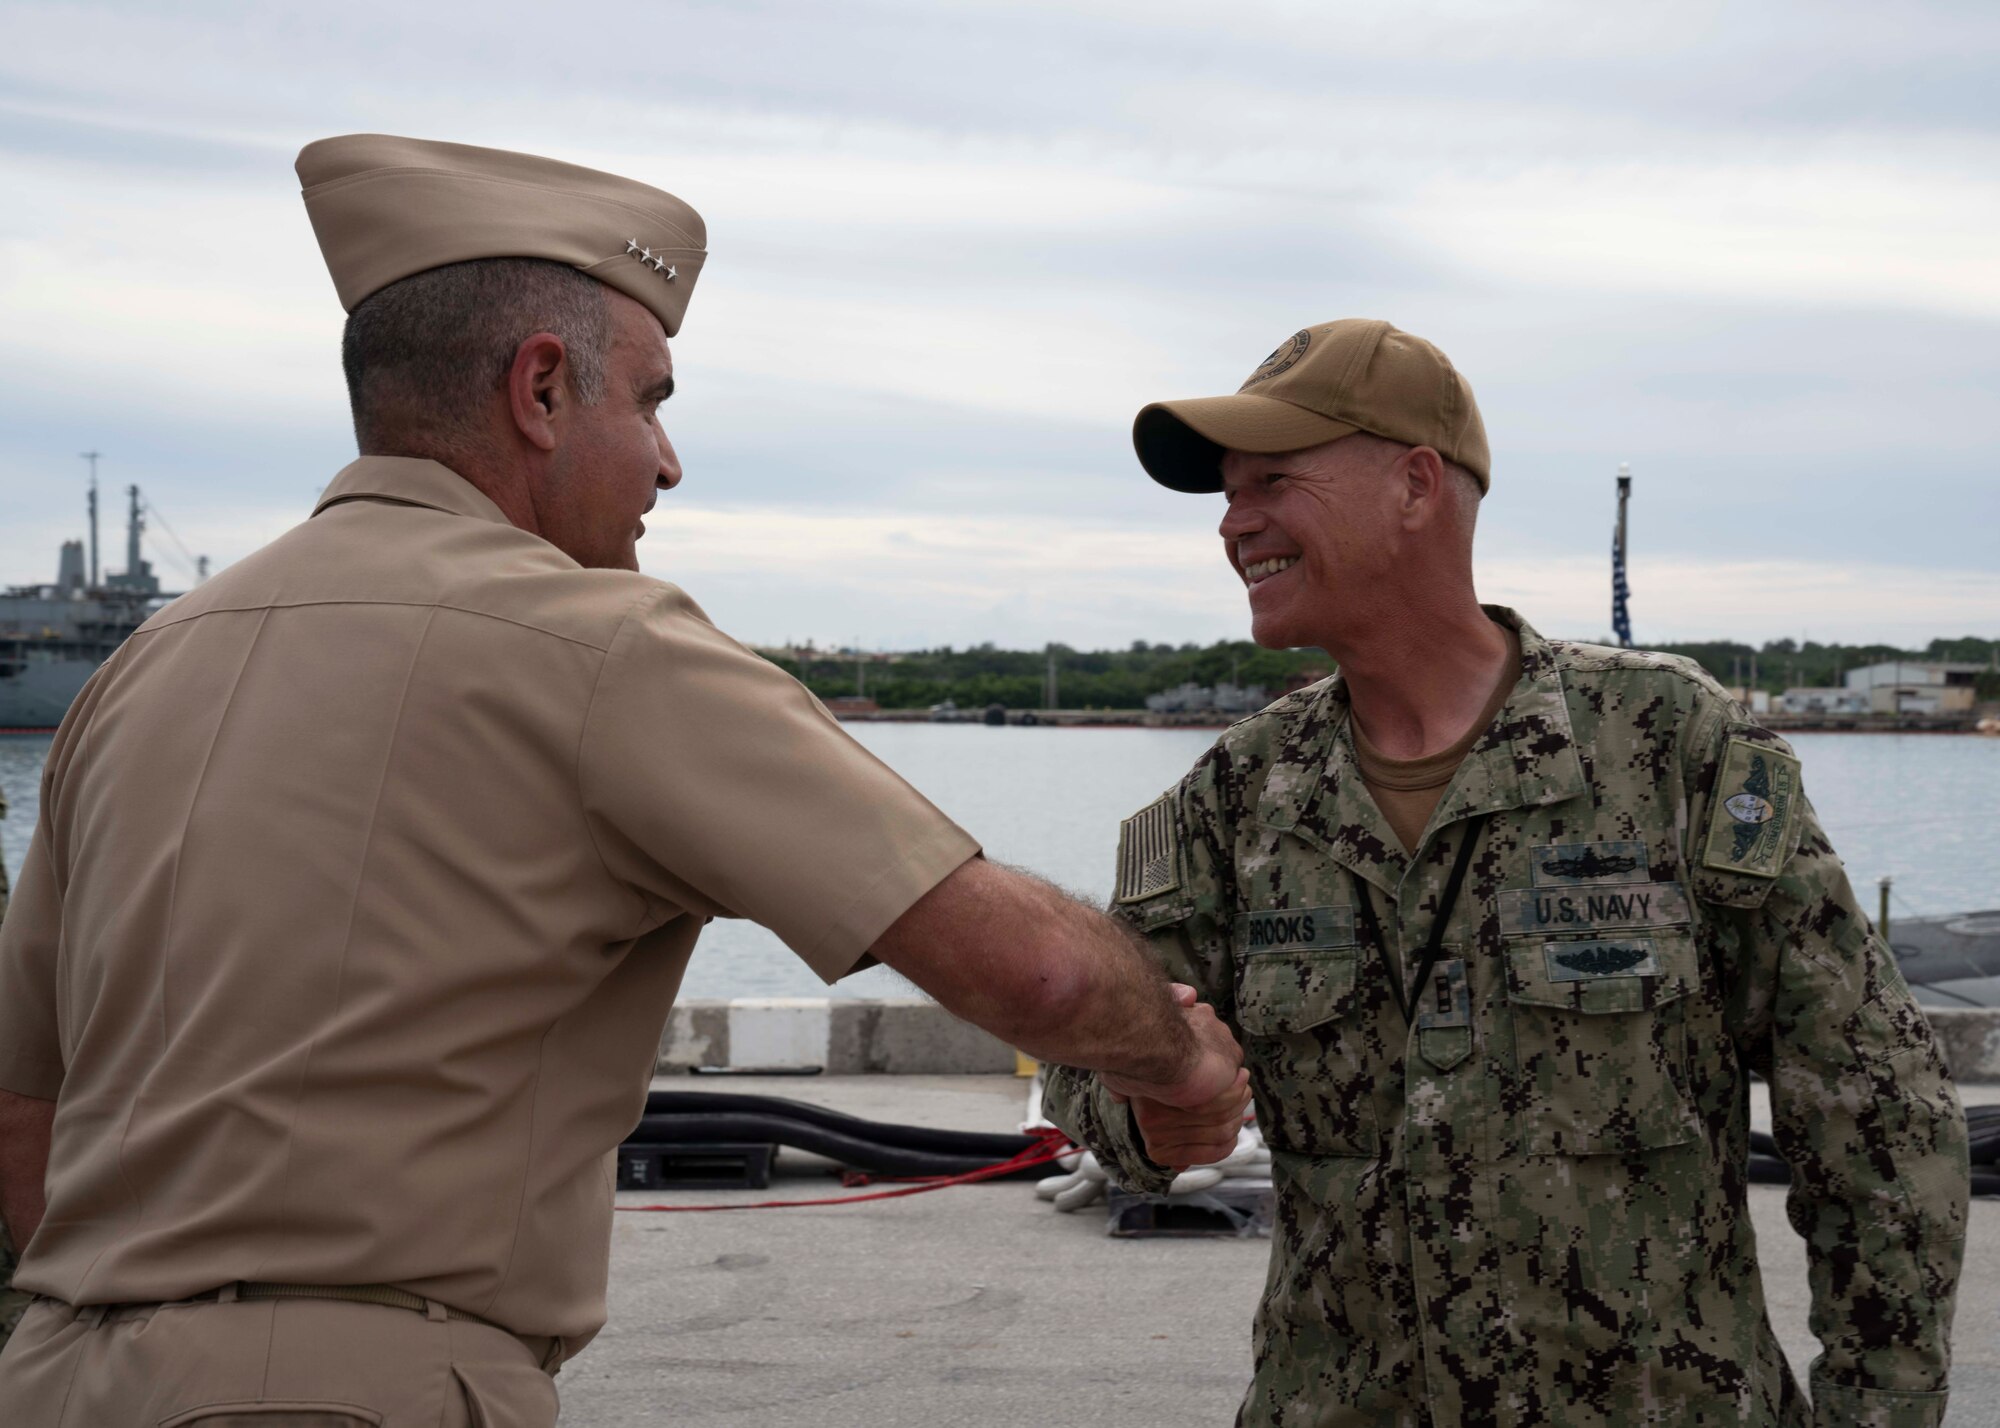 Admiral Chas Richard, Commander, United States Strategic Command, shakes hands with Chief Warrant Officer Barron Brooks following a tour of the Virginia-class fast-attack submarine USS Illinois (SSN 786). Richard visited commands on Guam to see how they fit into the USSTRATCOM mission of deterring strategic attack and employing forces, as directed, to guarantee the security of the nation and its allies.